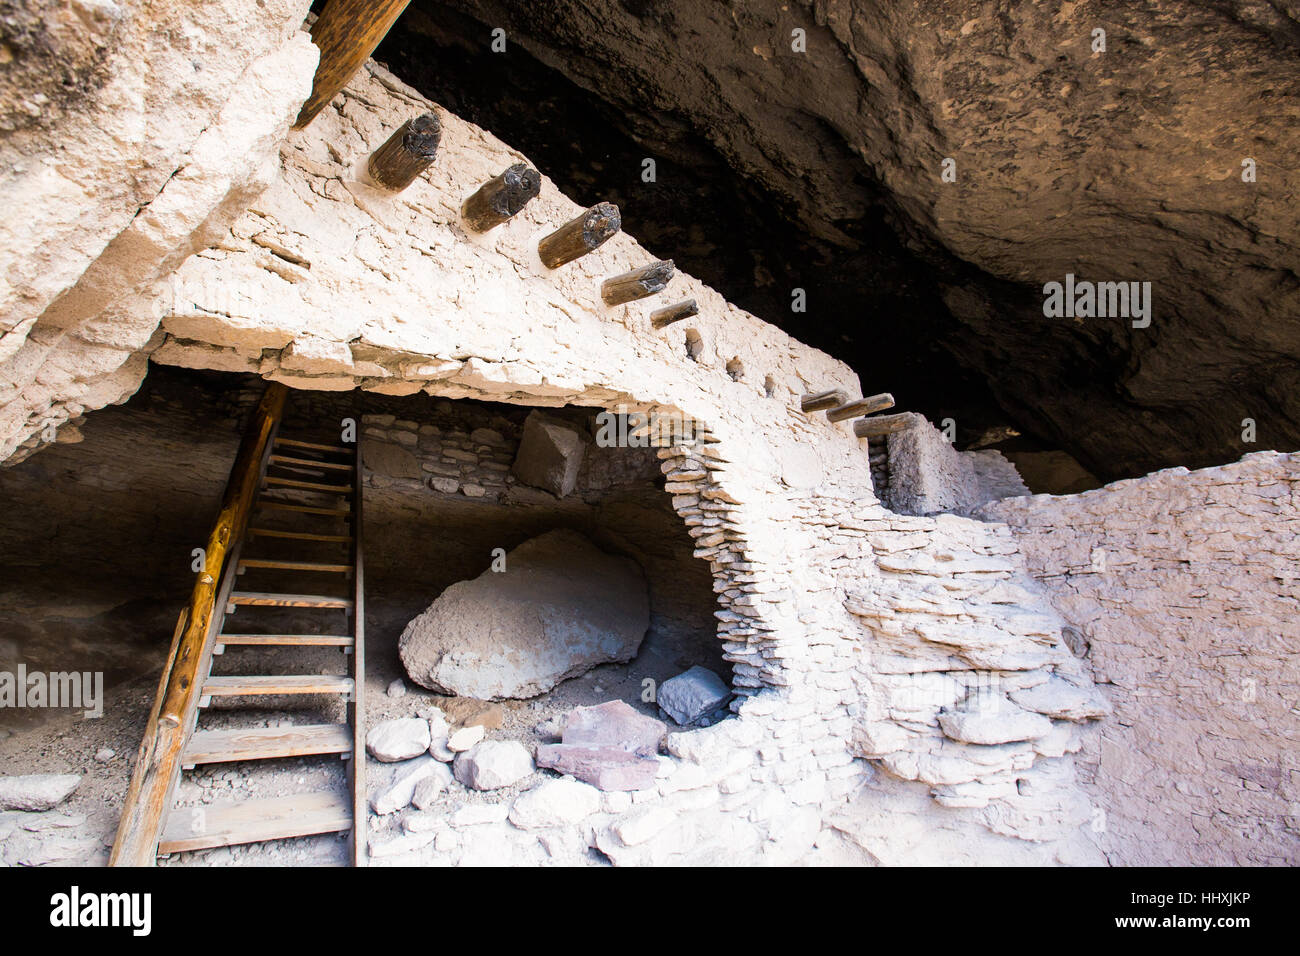 Gila Cliff Dwellings National Monument Stock Photo